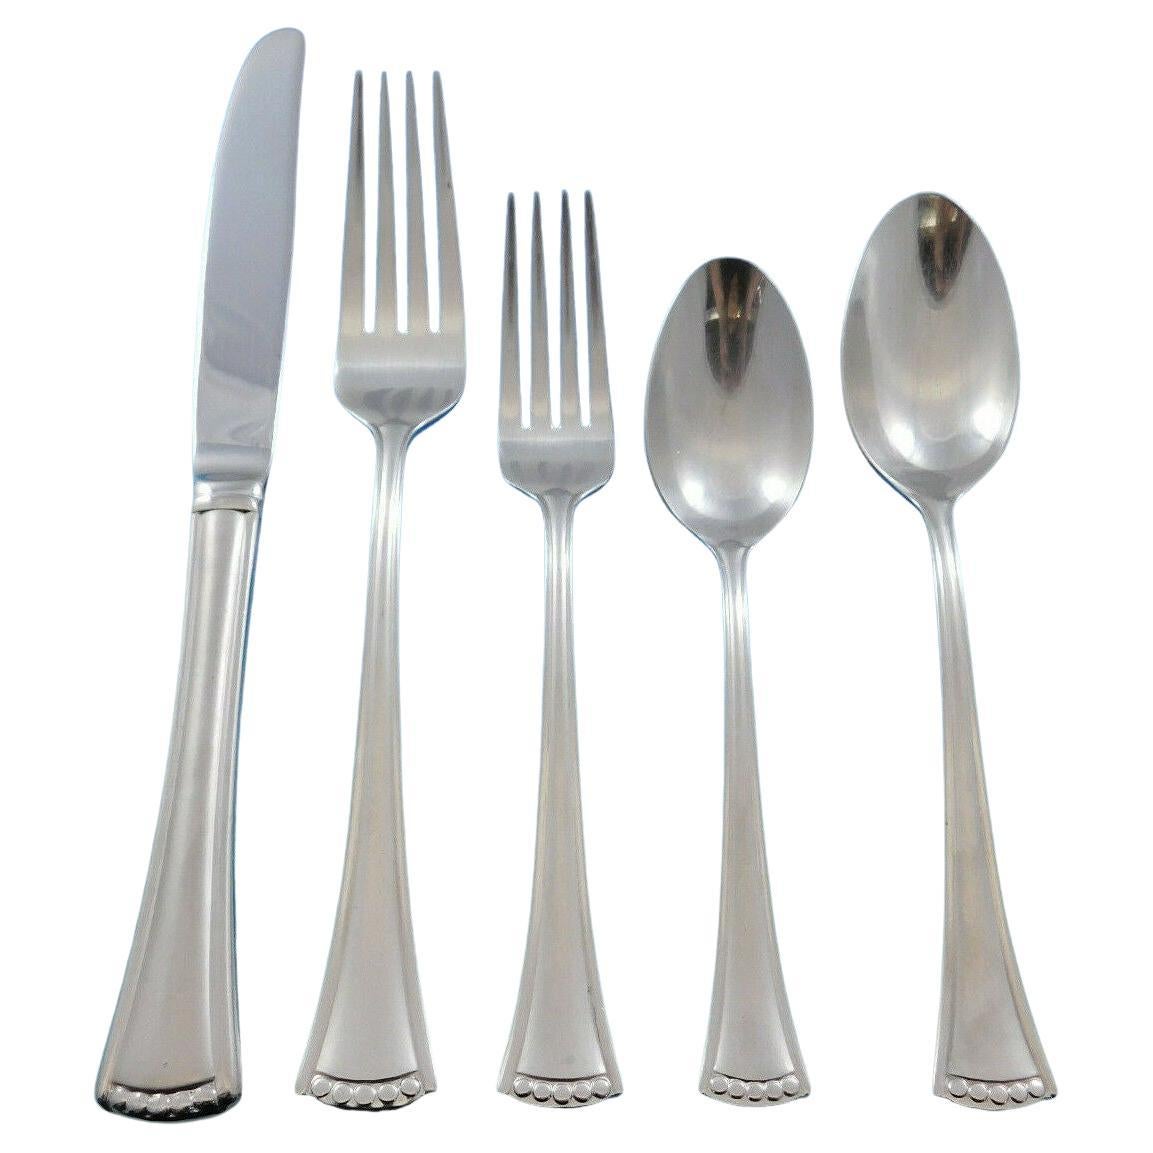 Butlers Pantry by Lenox Stainless Steel Flatware Set Service Large Size Dinner